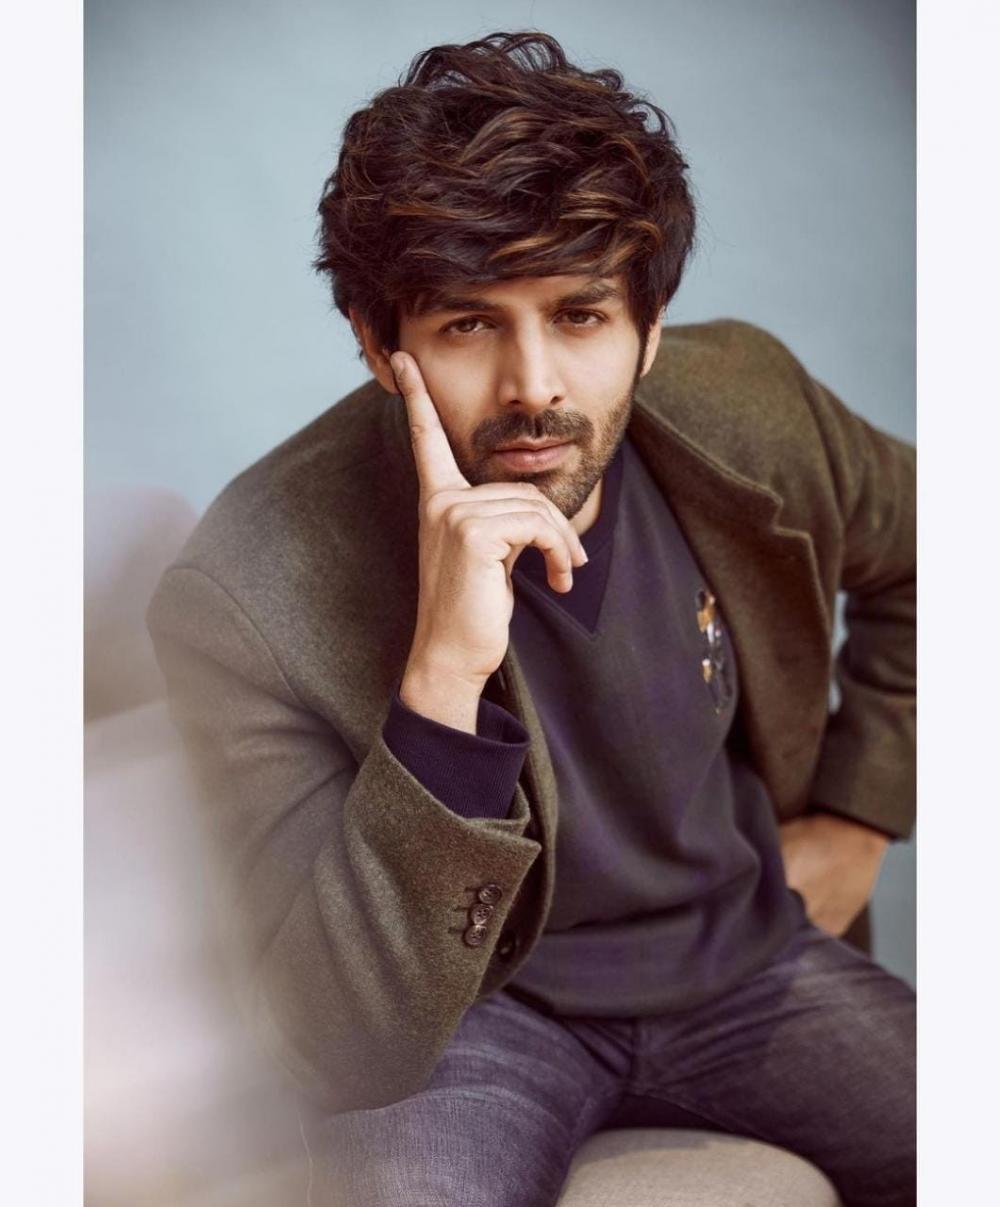 The Weekend Leader - Kartik Aaryan ups the cool quotient with his whacky shirt